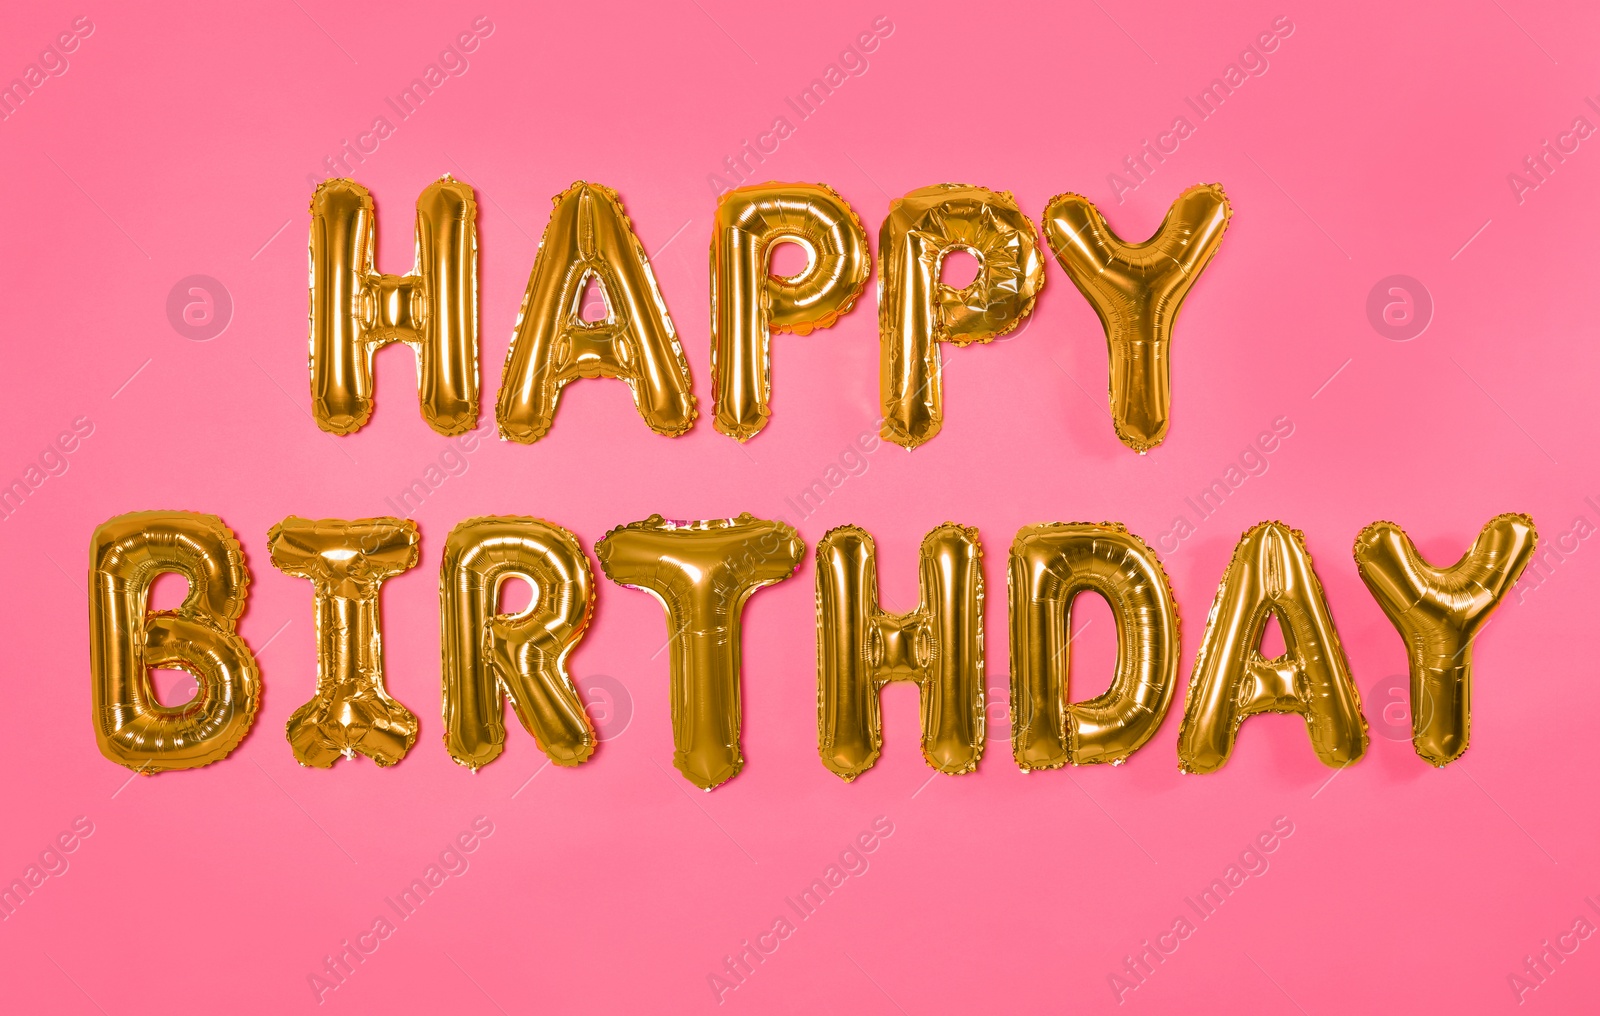 Photo of Phrase HAPPY BIRTHDAY made of foil balloon letters on pink background